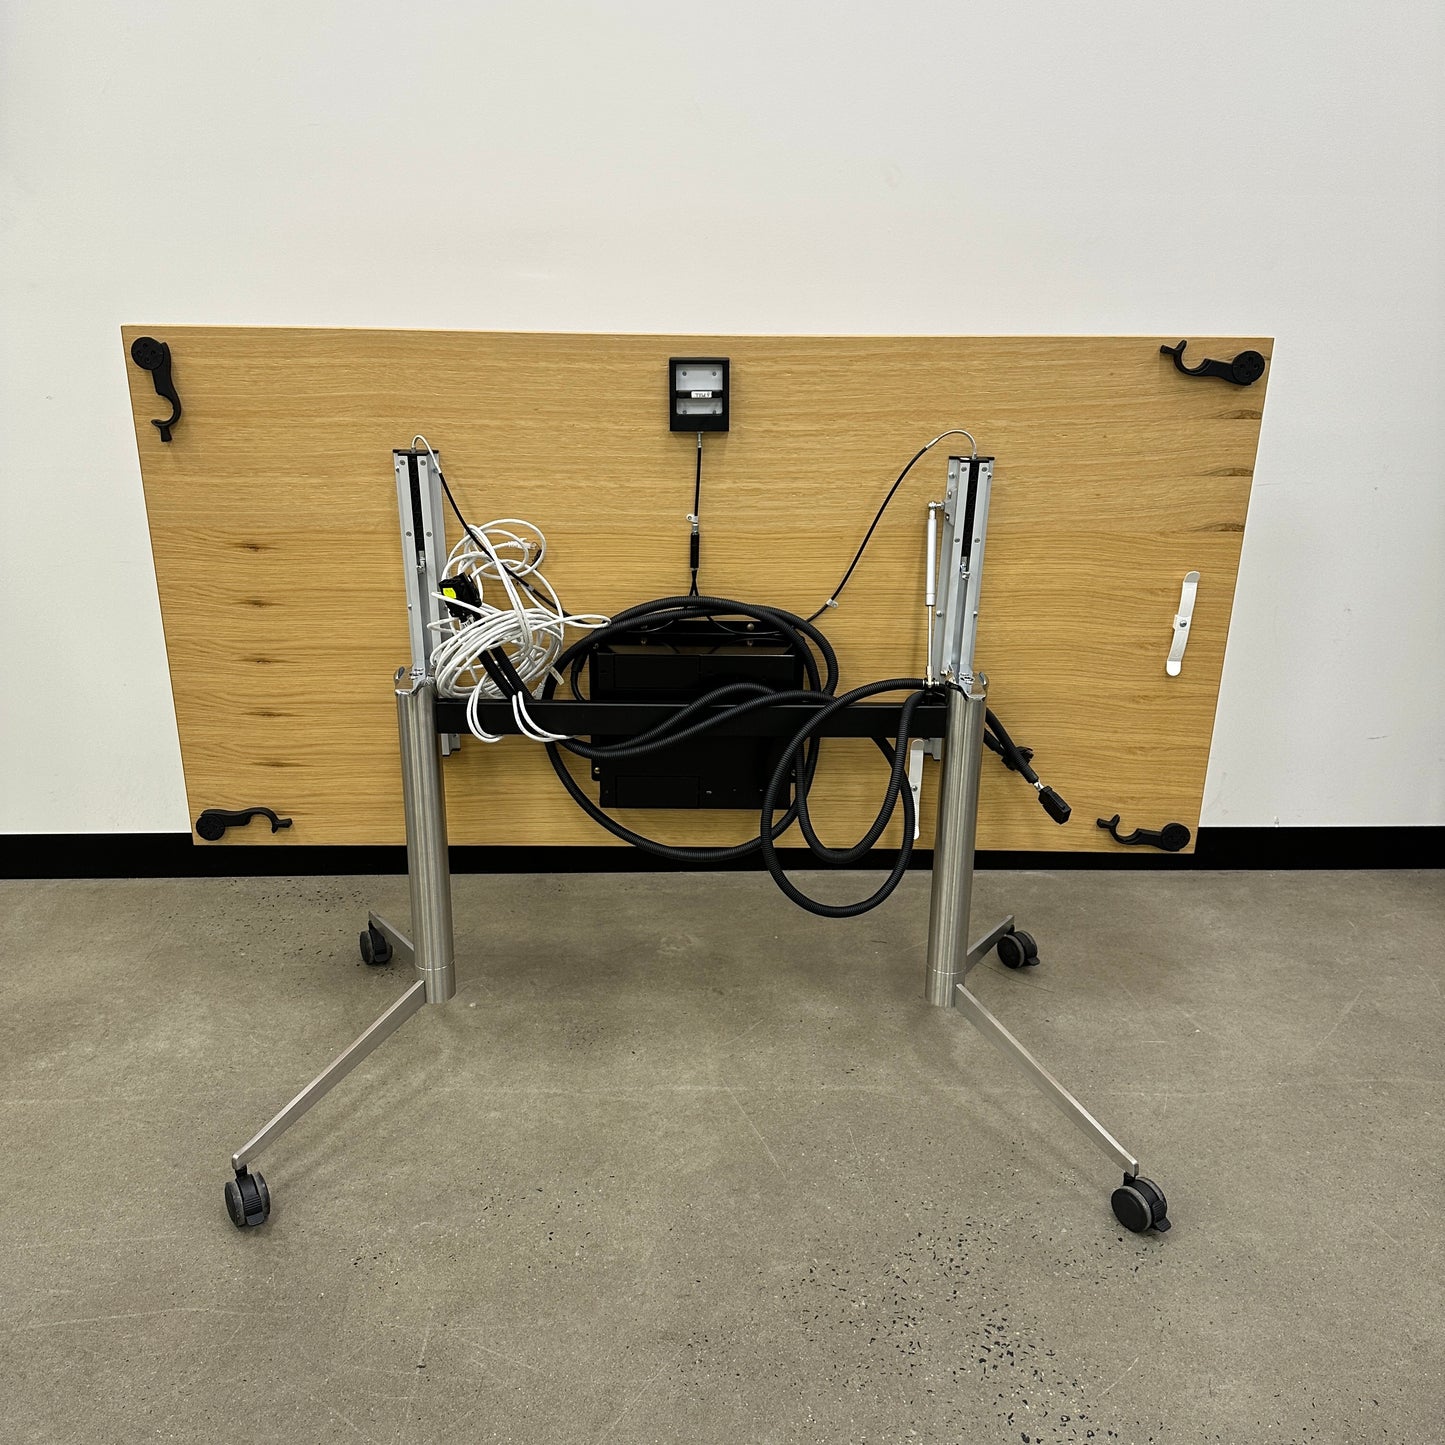 Krost Oslo Flip Wooden Table Desk with Cable Management